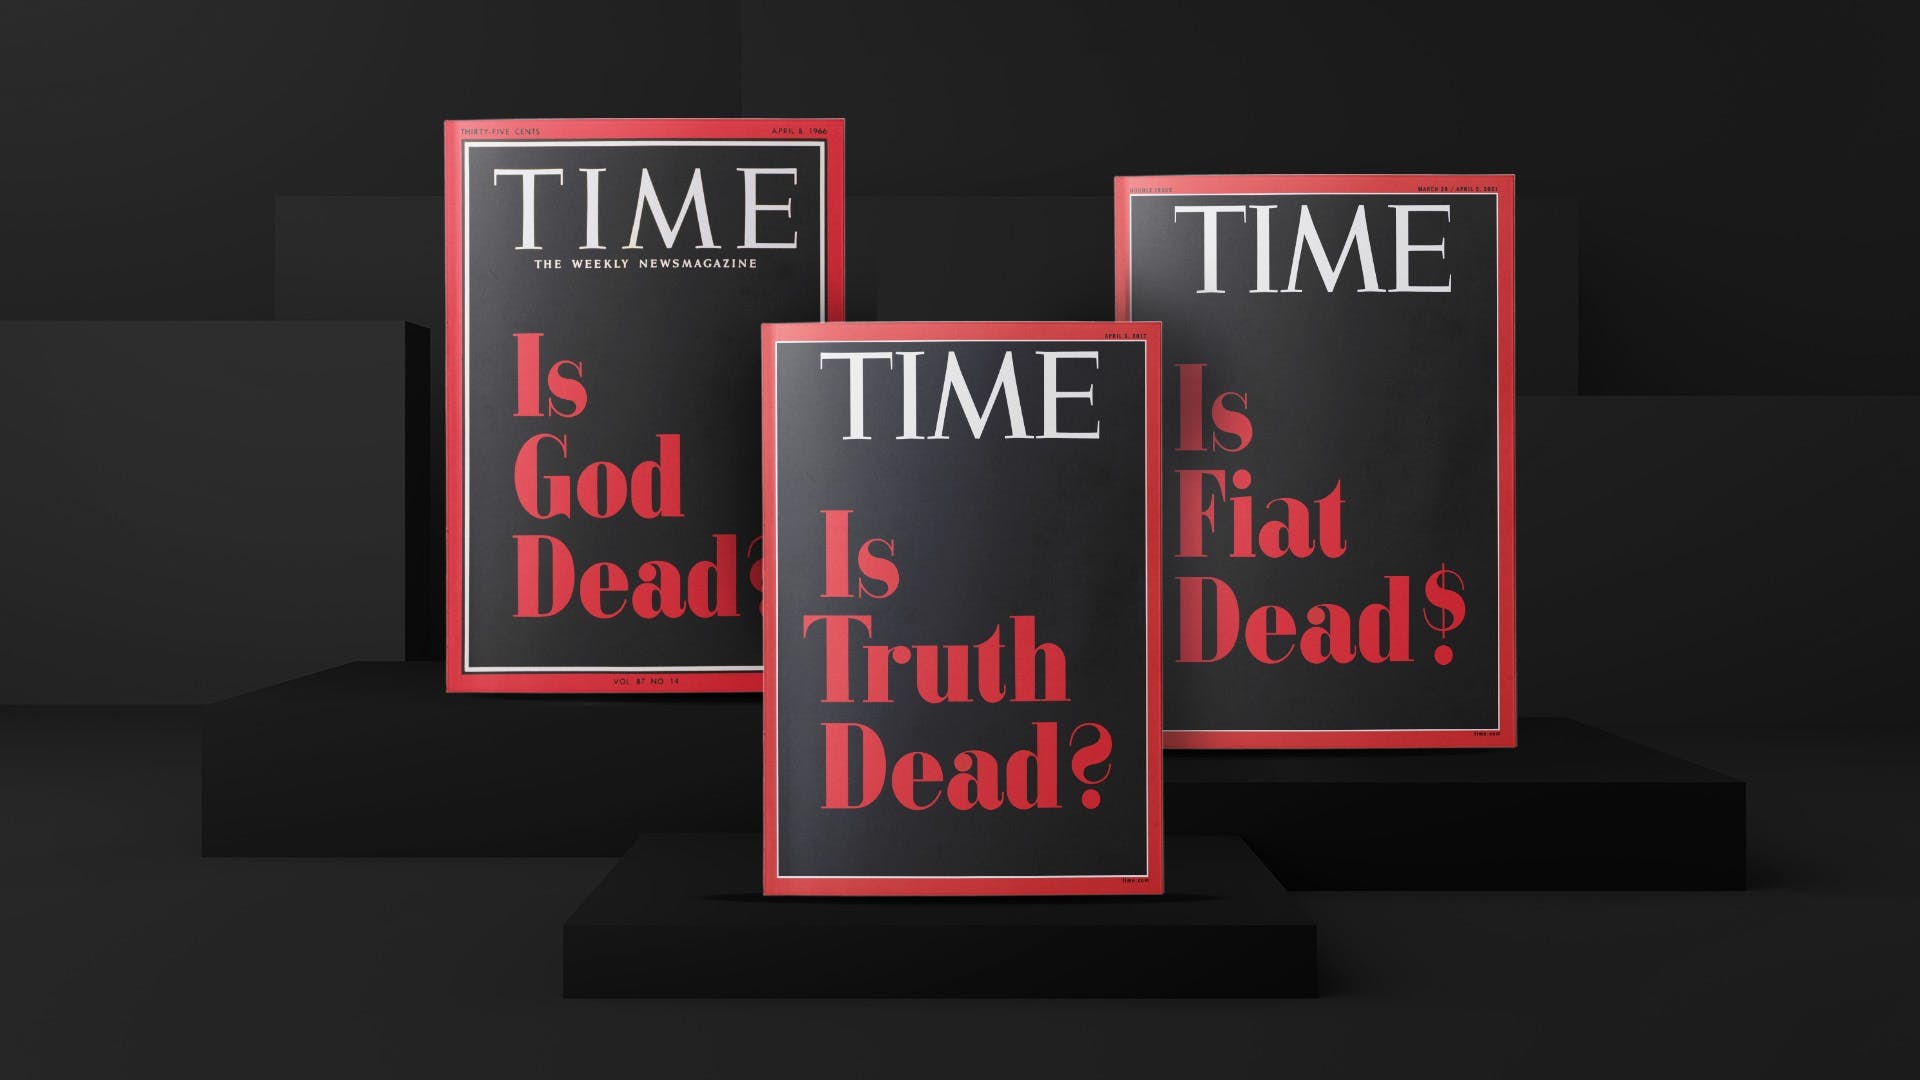 "TIME is _ _ _ Dead?" via SuperRare